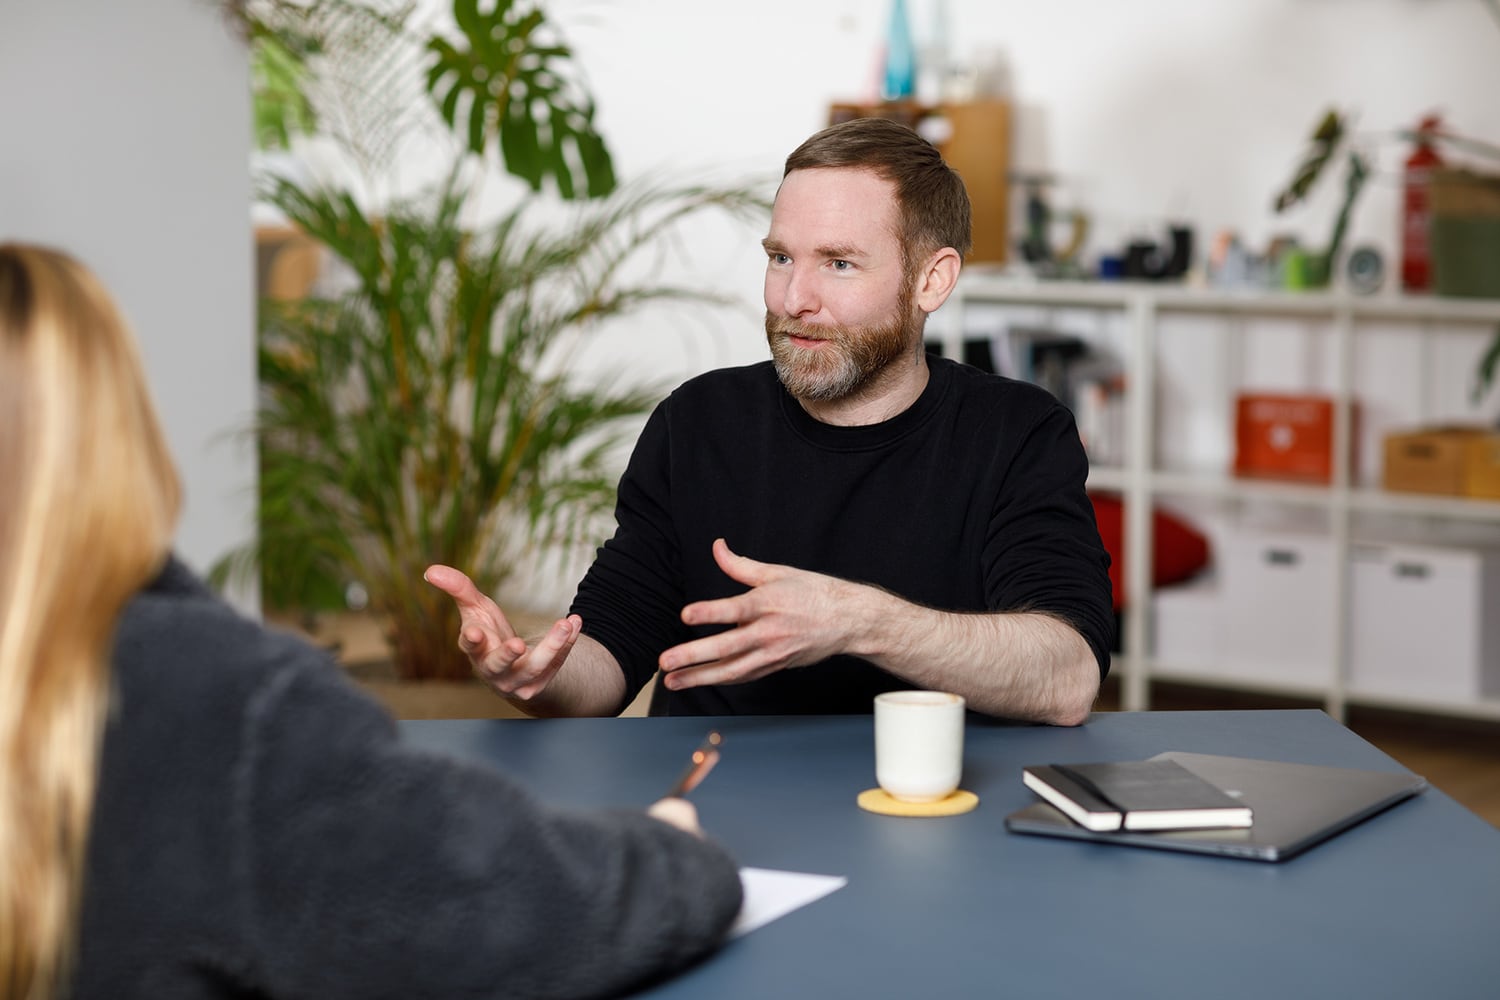 Interview with Thorsten Moser about branding for digital products.